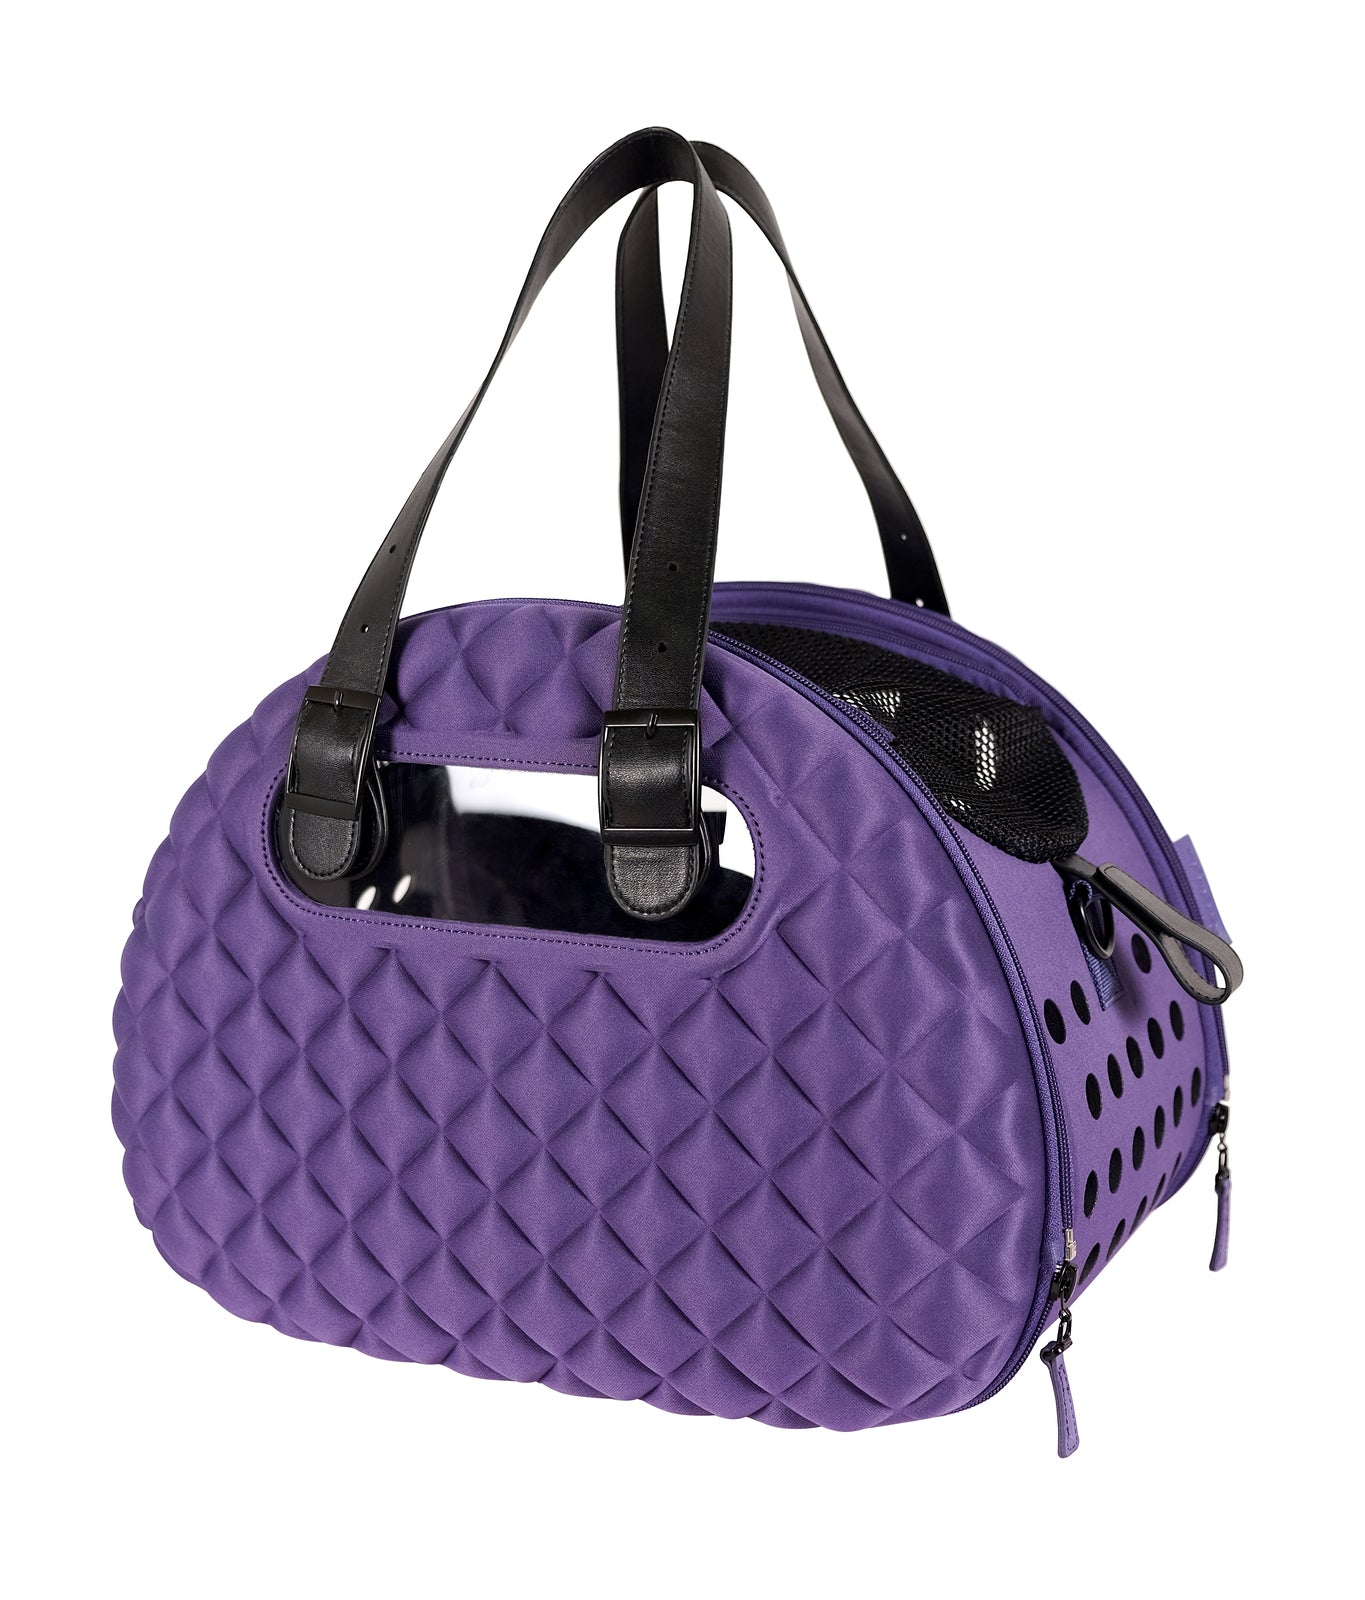 Ibiyaya Collapsible Pet Carrier with Shoulder Strap - Diamond Deluxe Purple - Pets and More